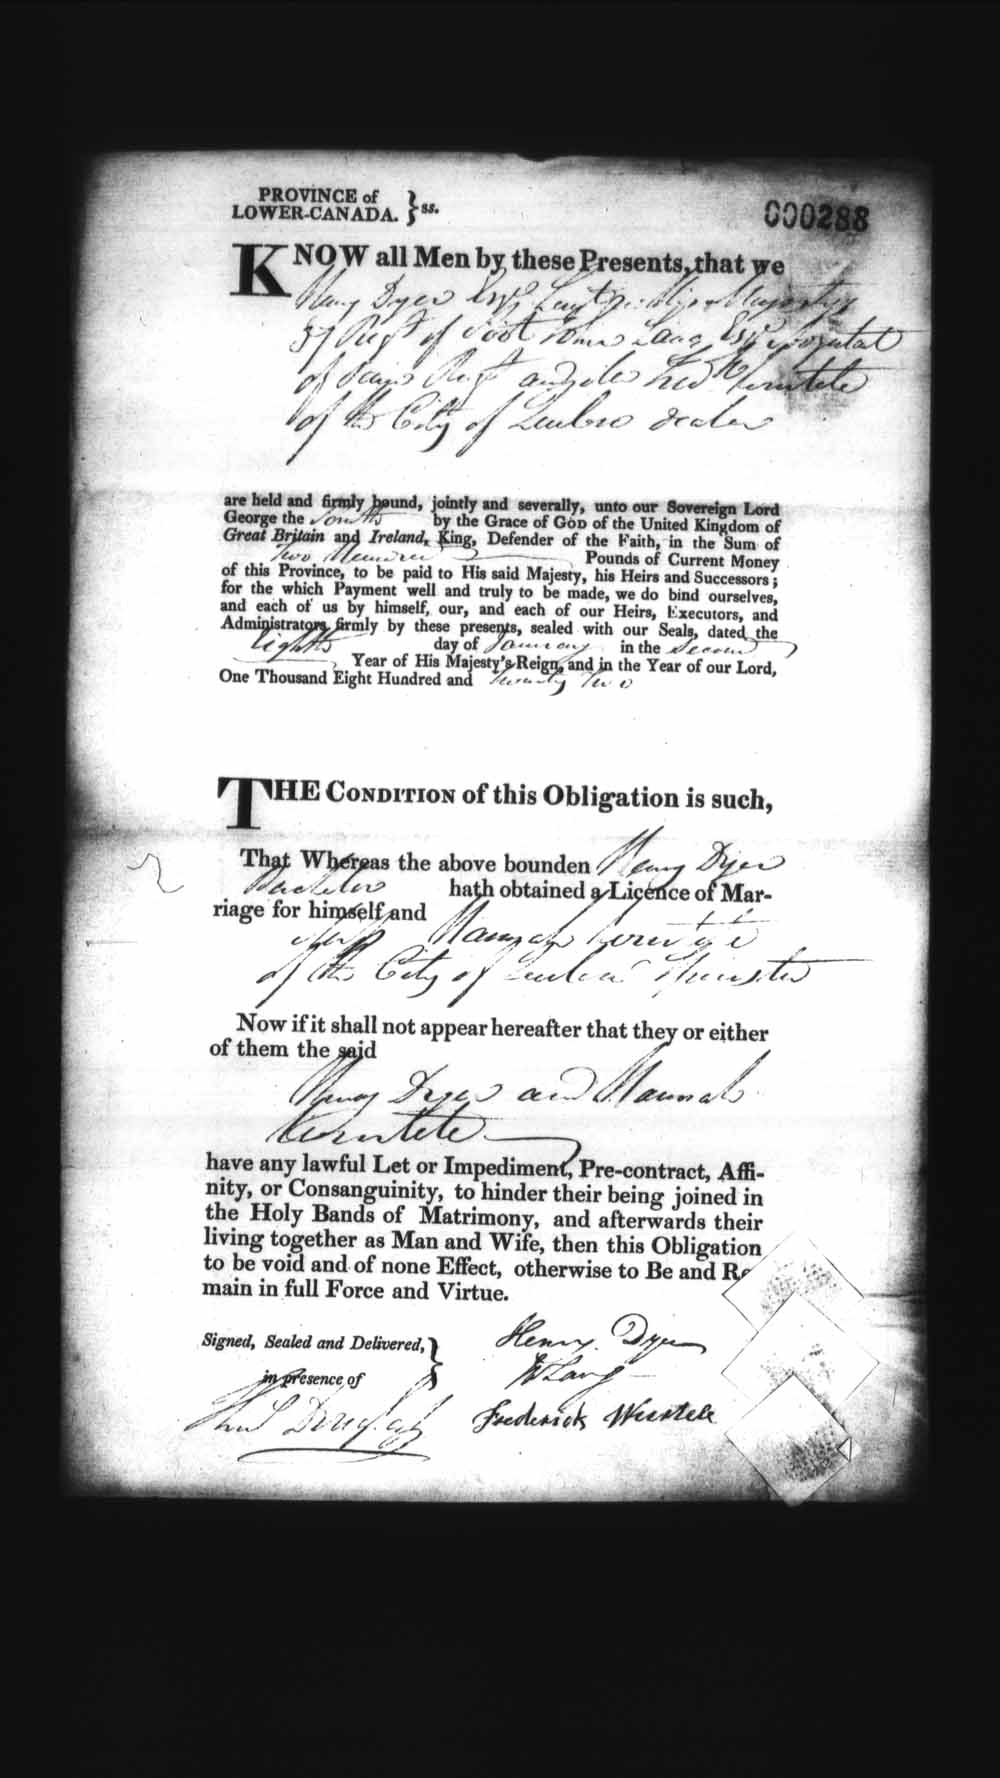 Digitized page of Upper and Lower Canada Marriage Bonds (1779-1865) for Image No.: e008236160